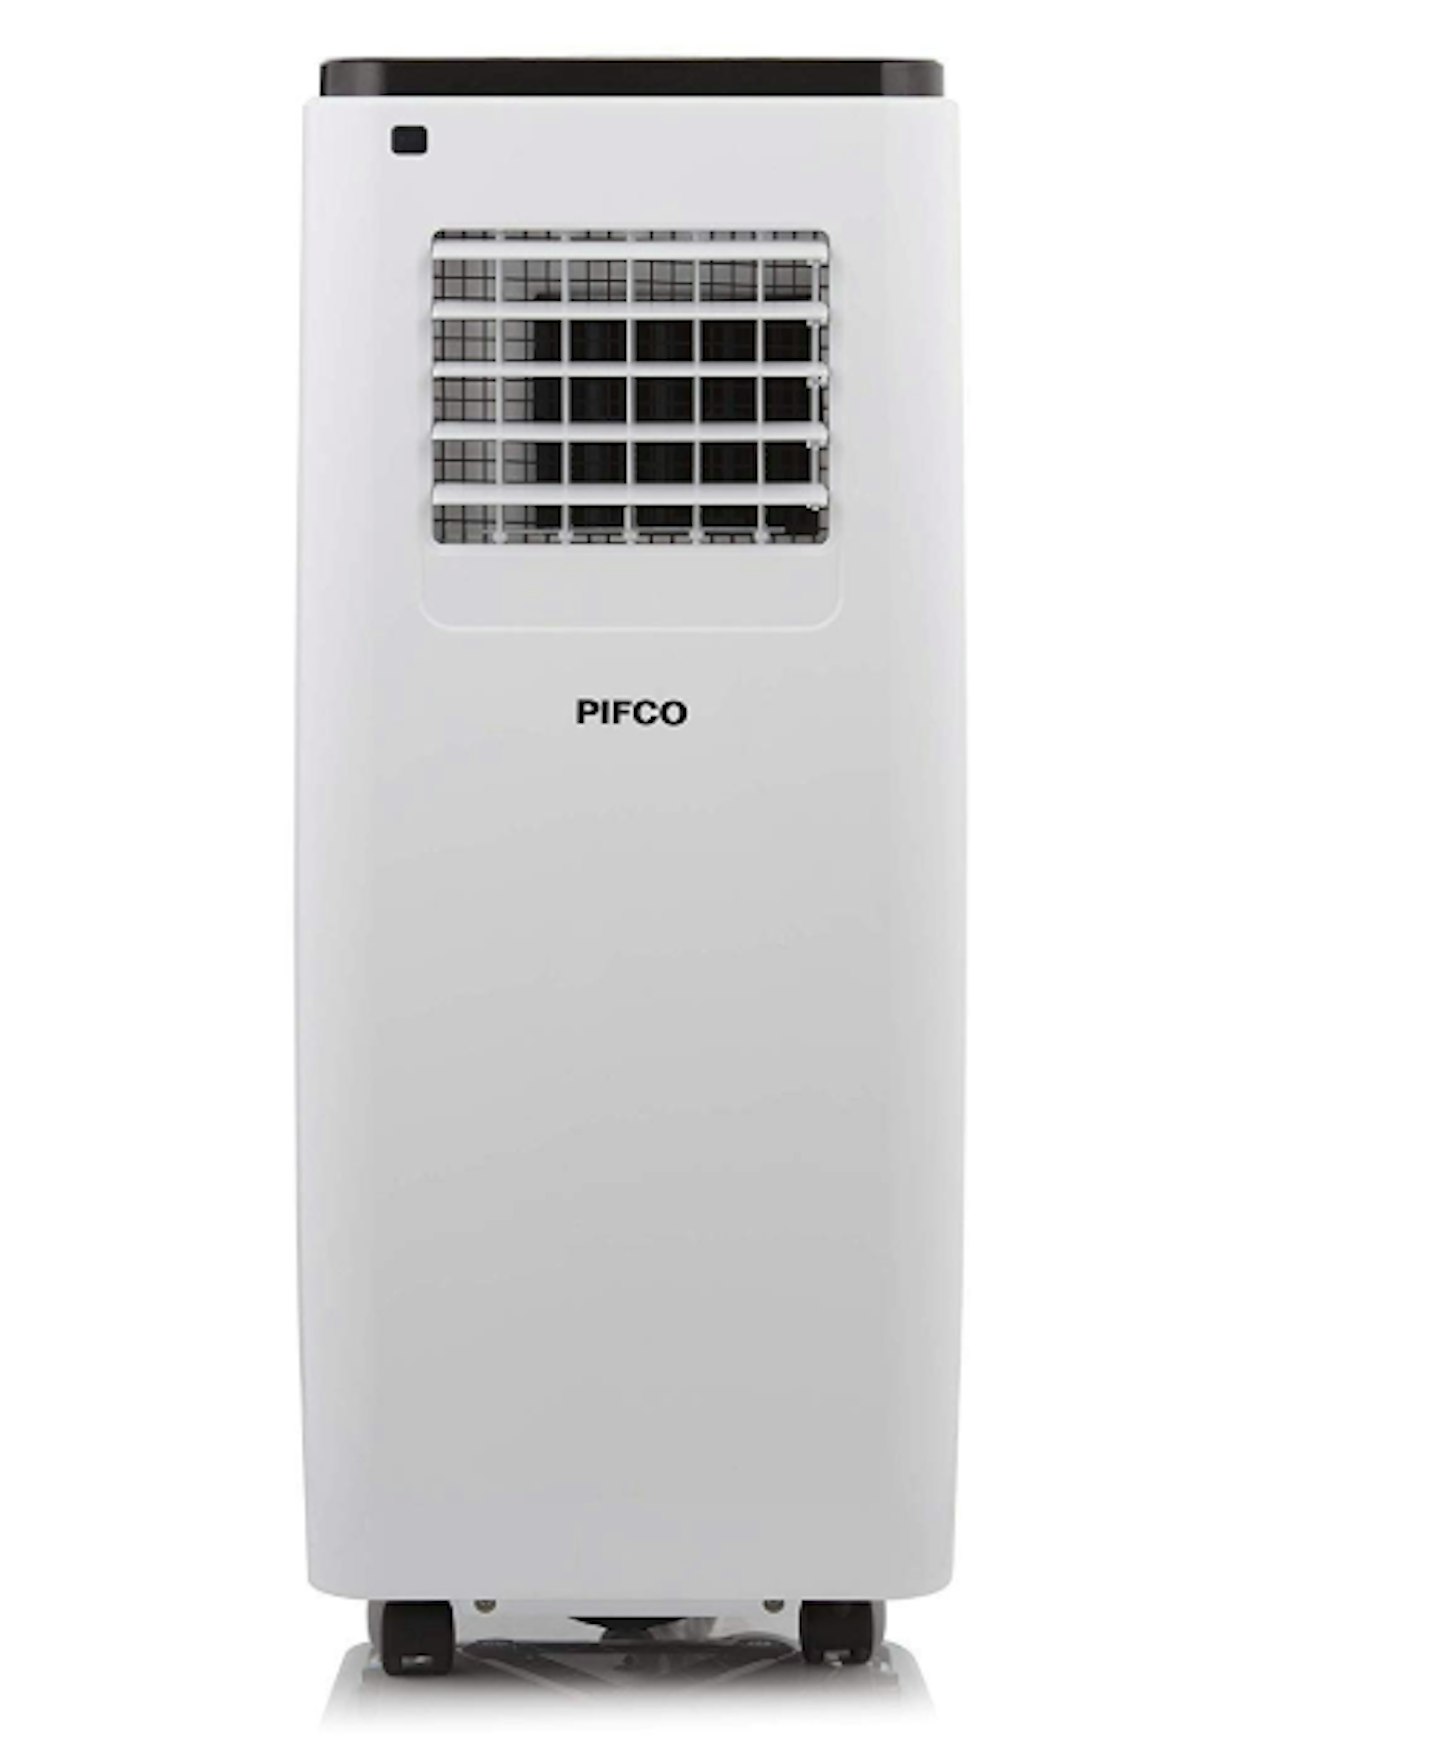 Pifco P40013 portable 3-In-1 air conditioner, fan, and dehumidifier, 368.45